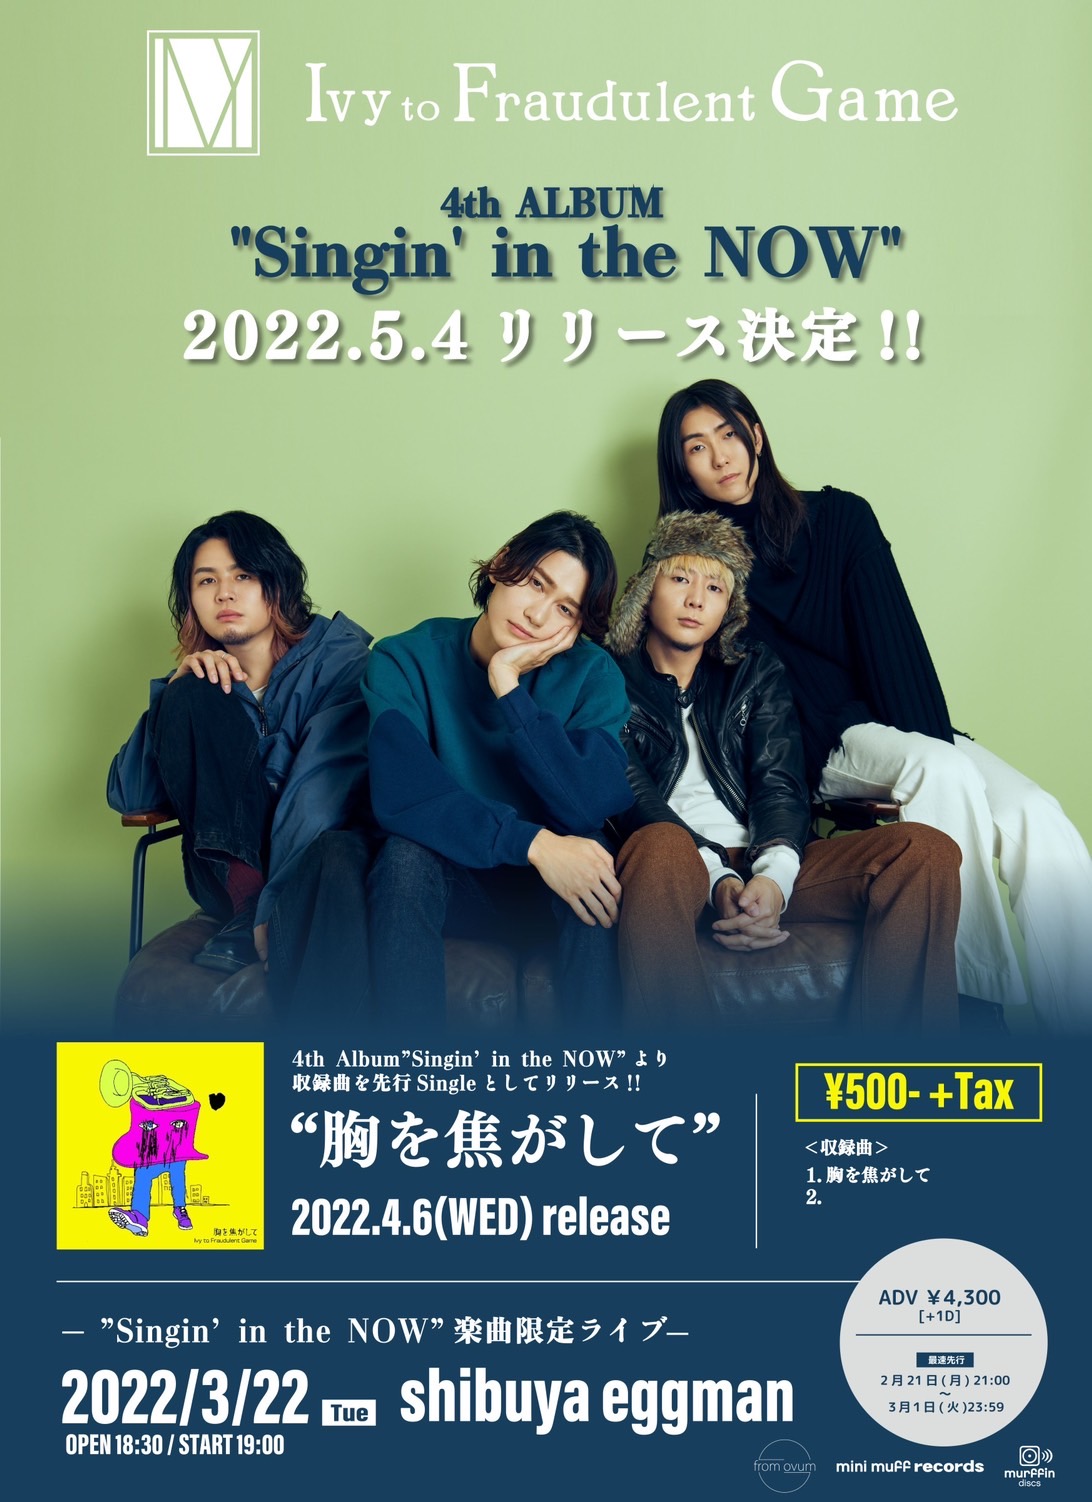 Ivy to Fraudulent Game Presents 4th ALBUM”Singin’ in the NOW”収録楽曲限定ライブ